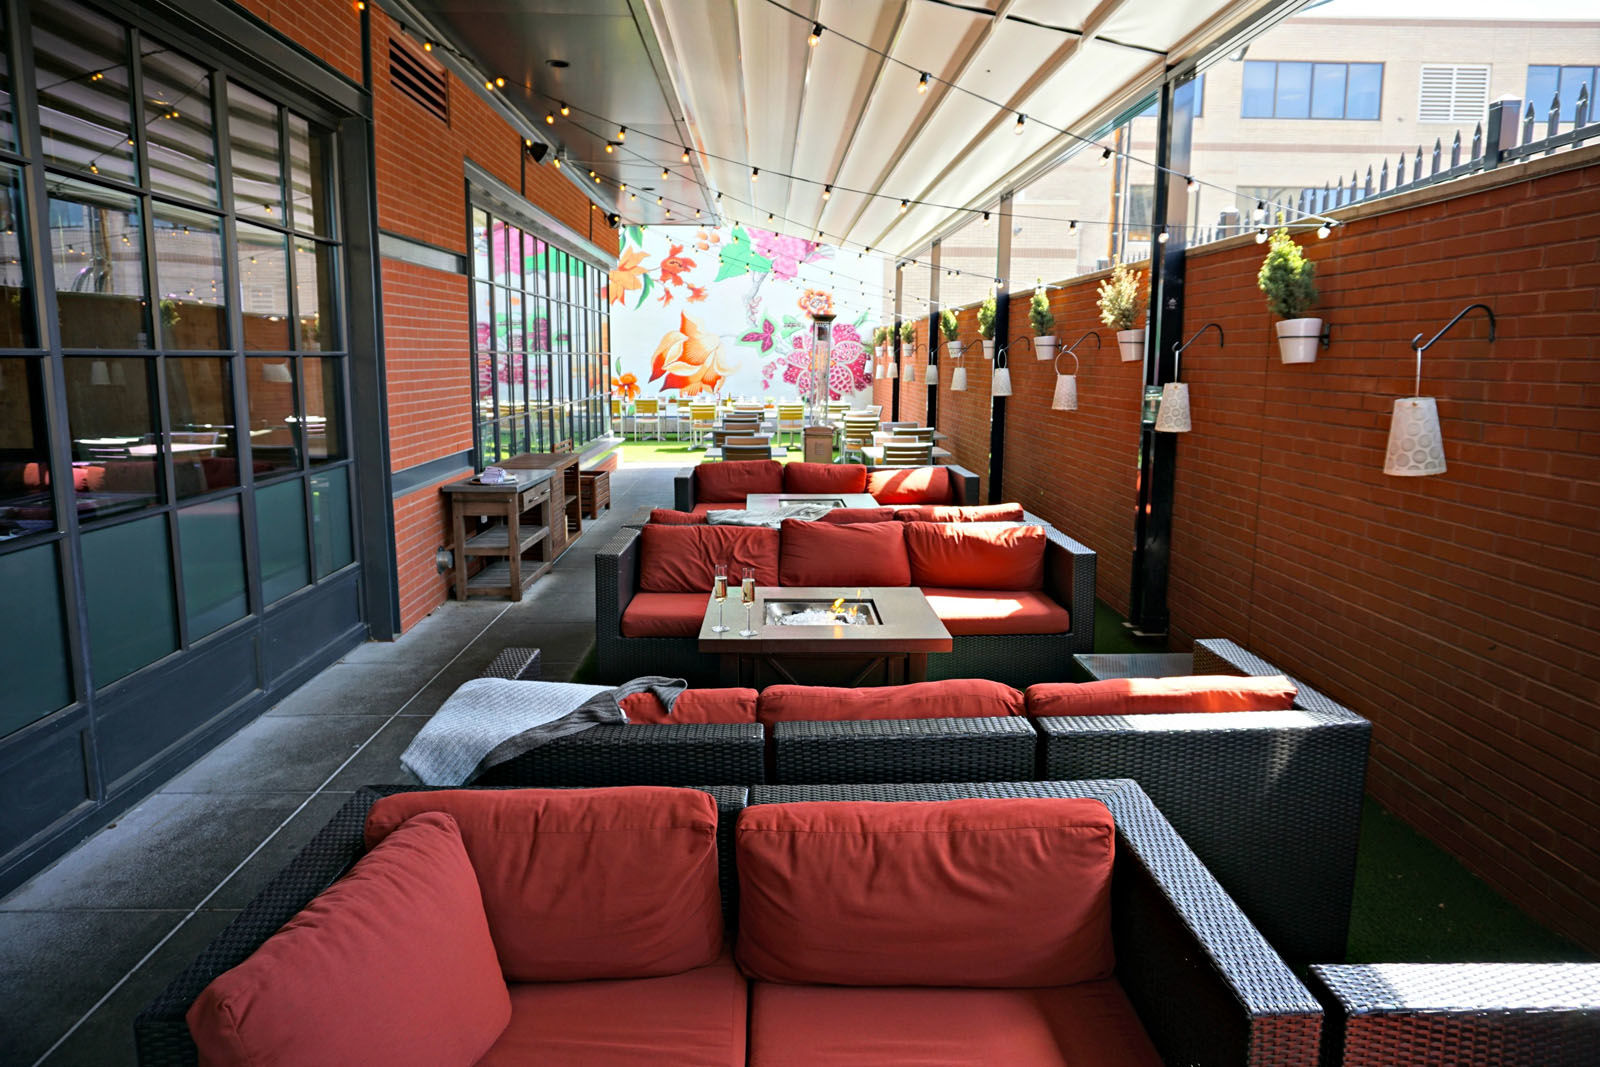 Hazel boasts a fun &amp; funky patio complete with astroturf, potted plant-lined brick walls, broad wicker seating, and fire pits to keep guests cozy in cooler temperatures. A bright, hand-painted floral mural serves as the centerpiece of the urban garden oasis. This summer, enjoy table side Spritz service via a roving cocktail cart. (Courtesy Hazel)